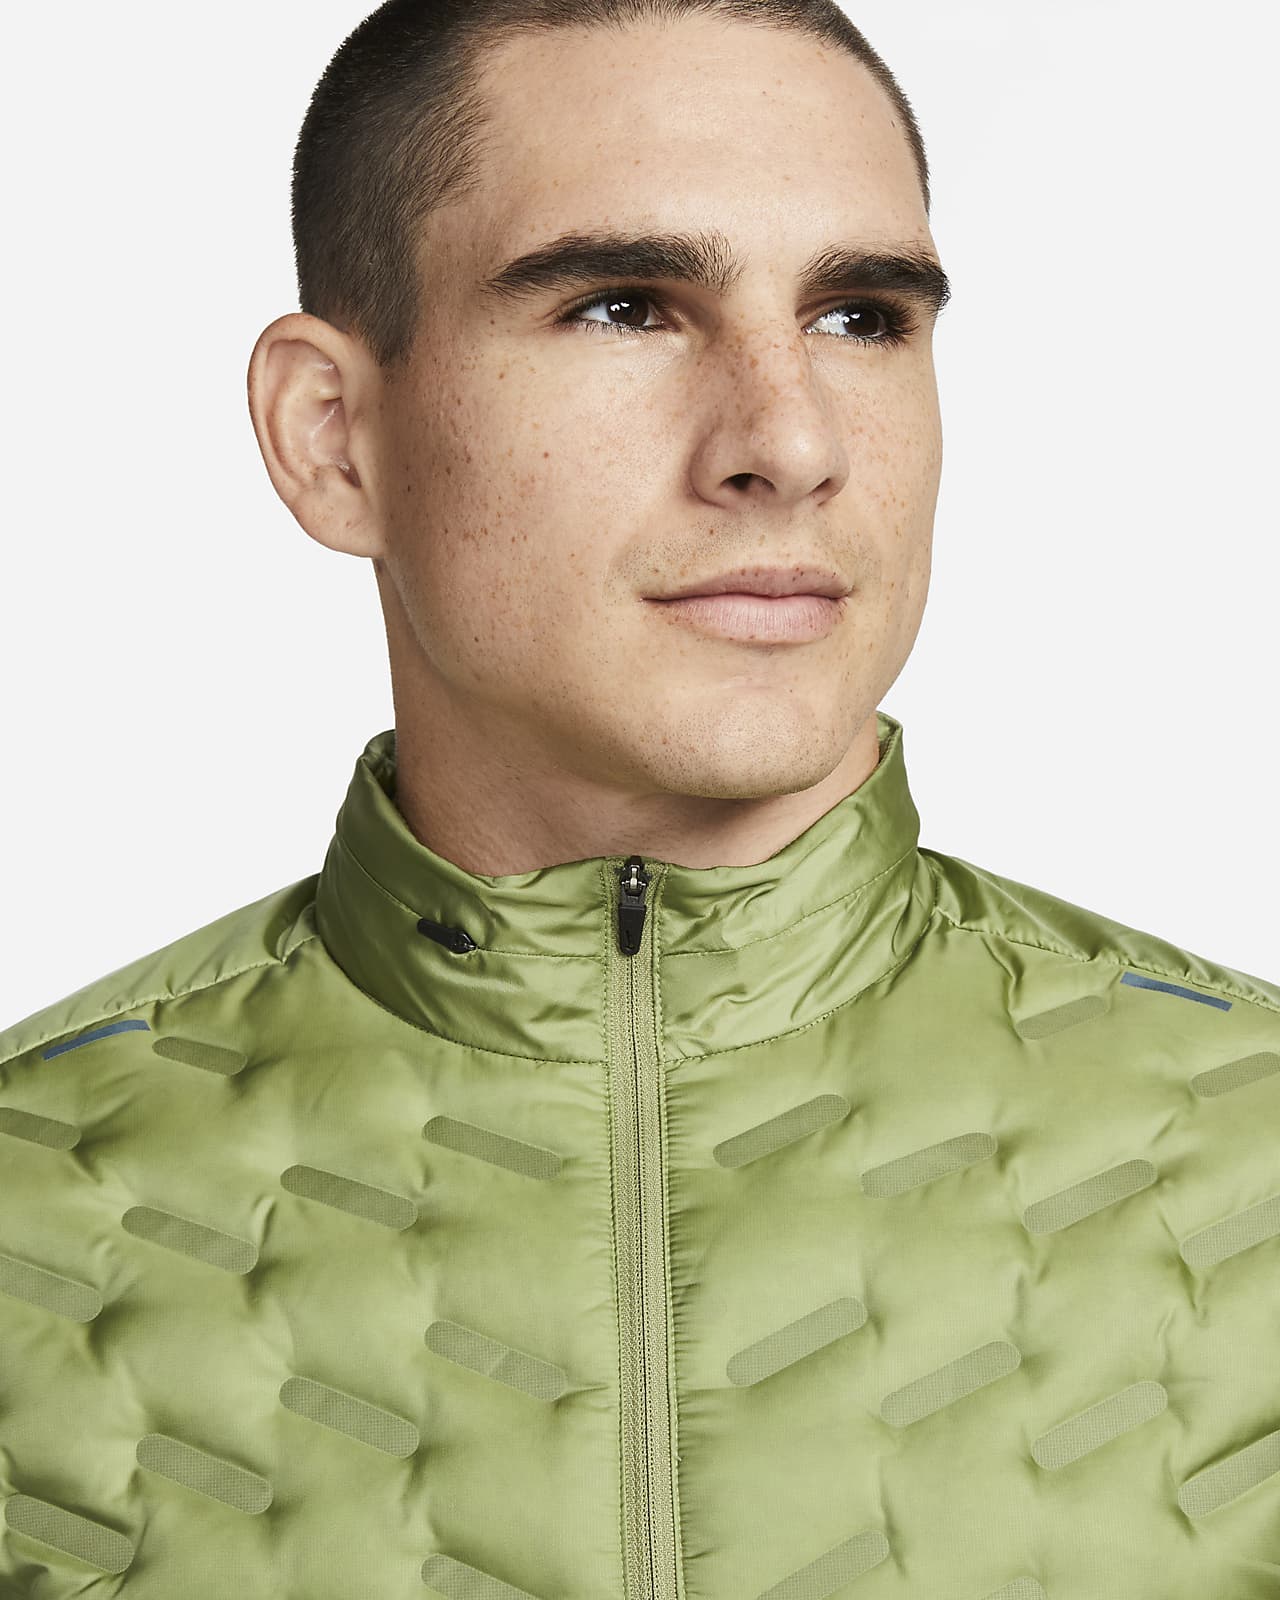 NIKE Therma-fit ADV running jacket